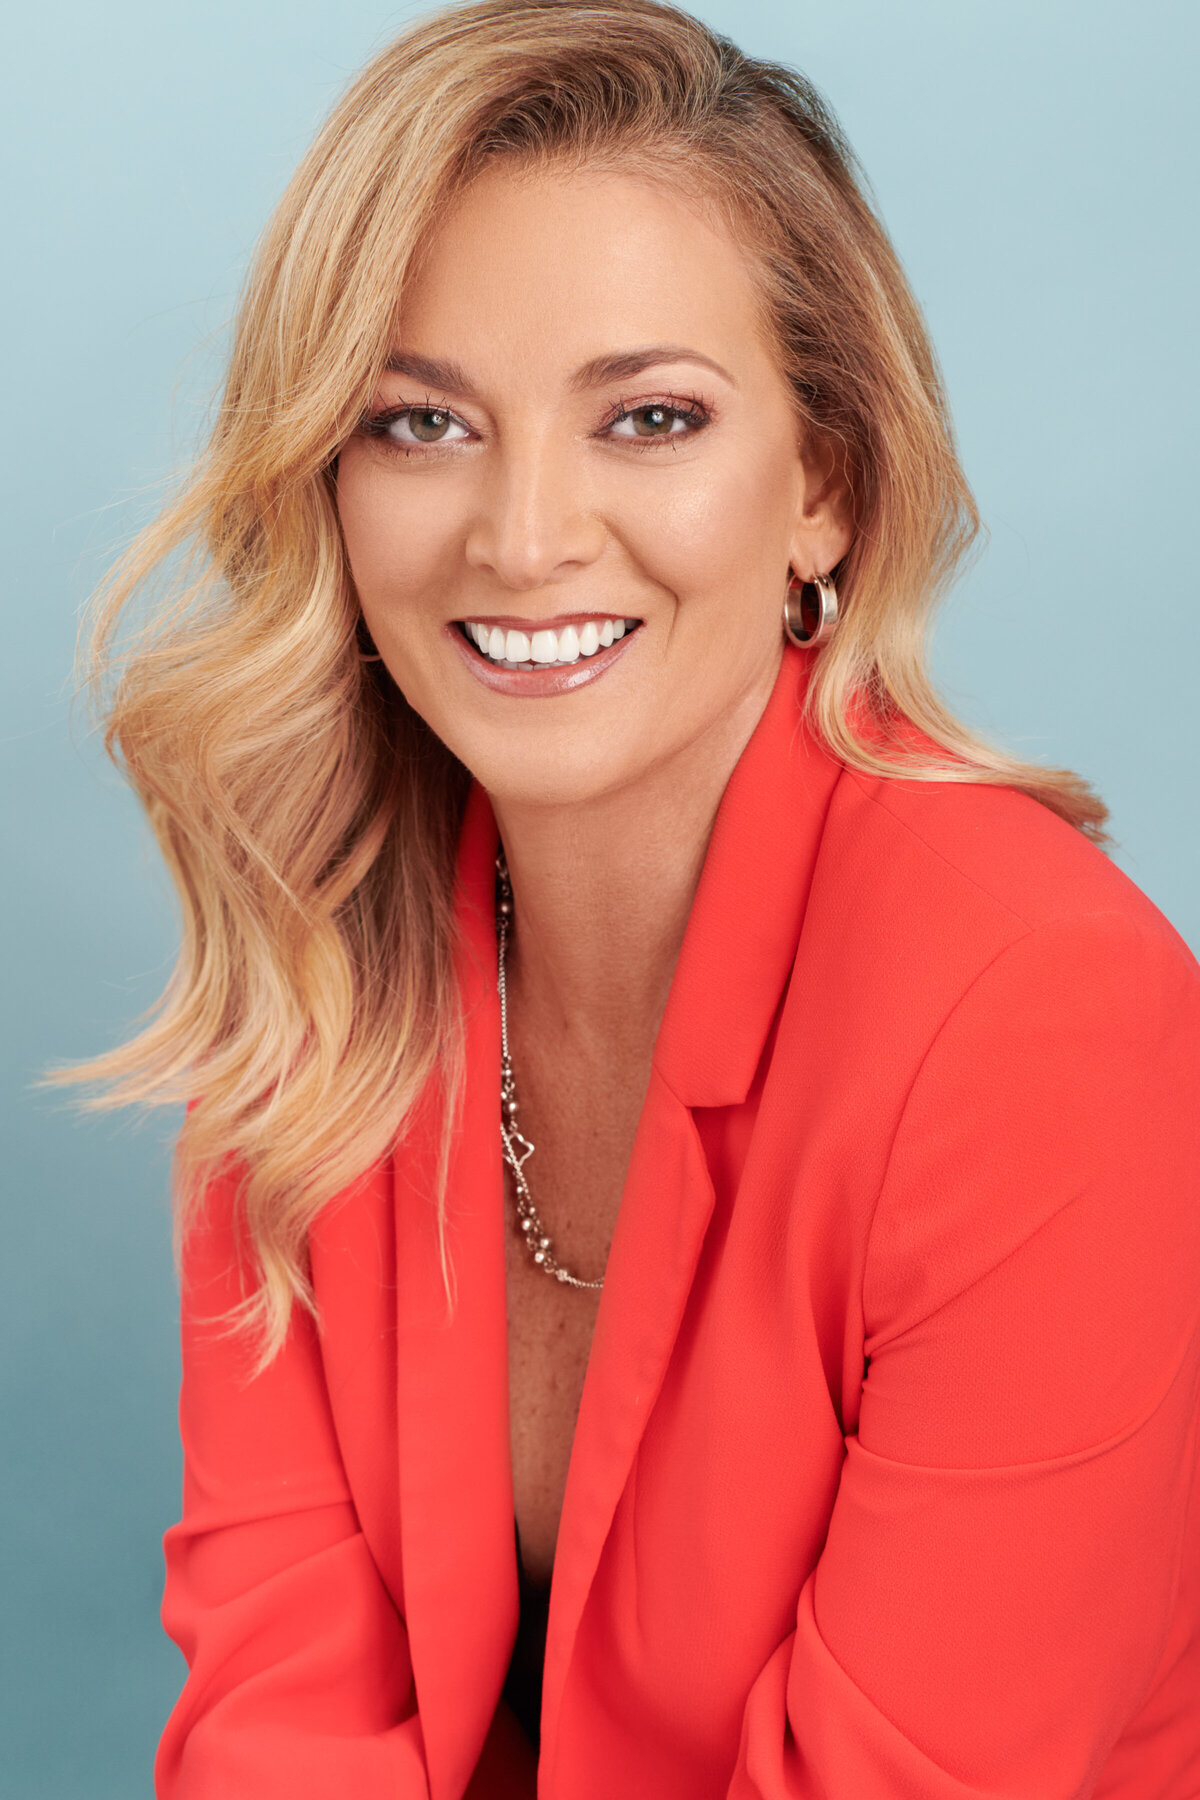 Beautiful woman in Coral jacket smiling for headshot